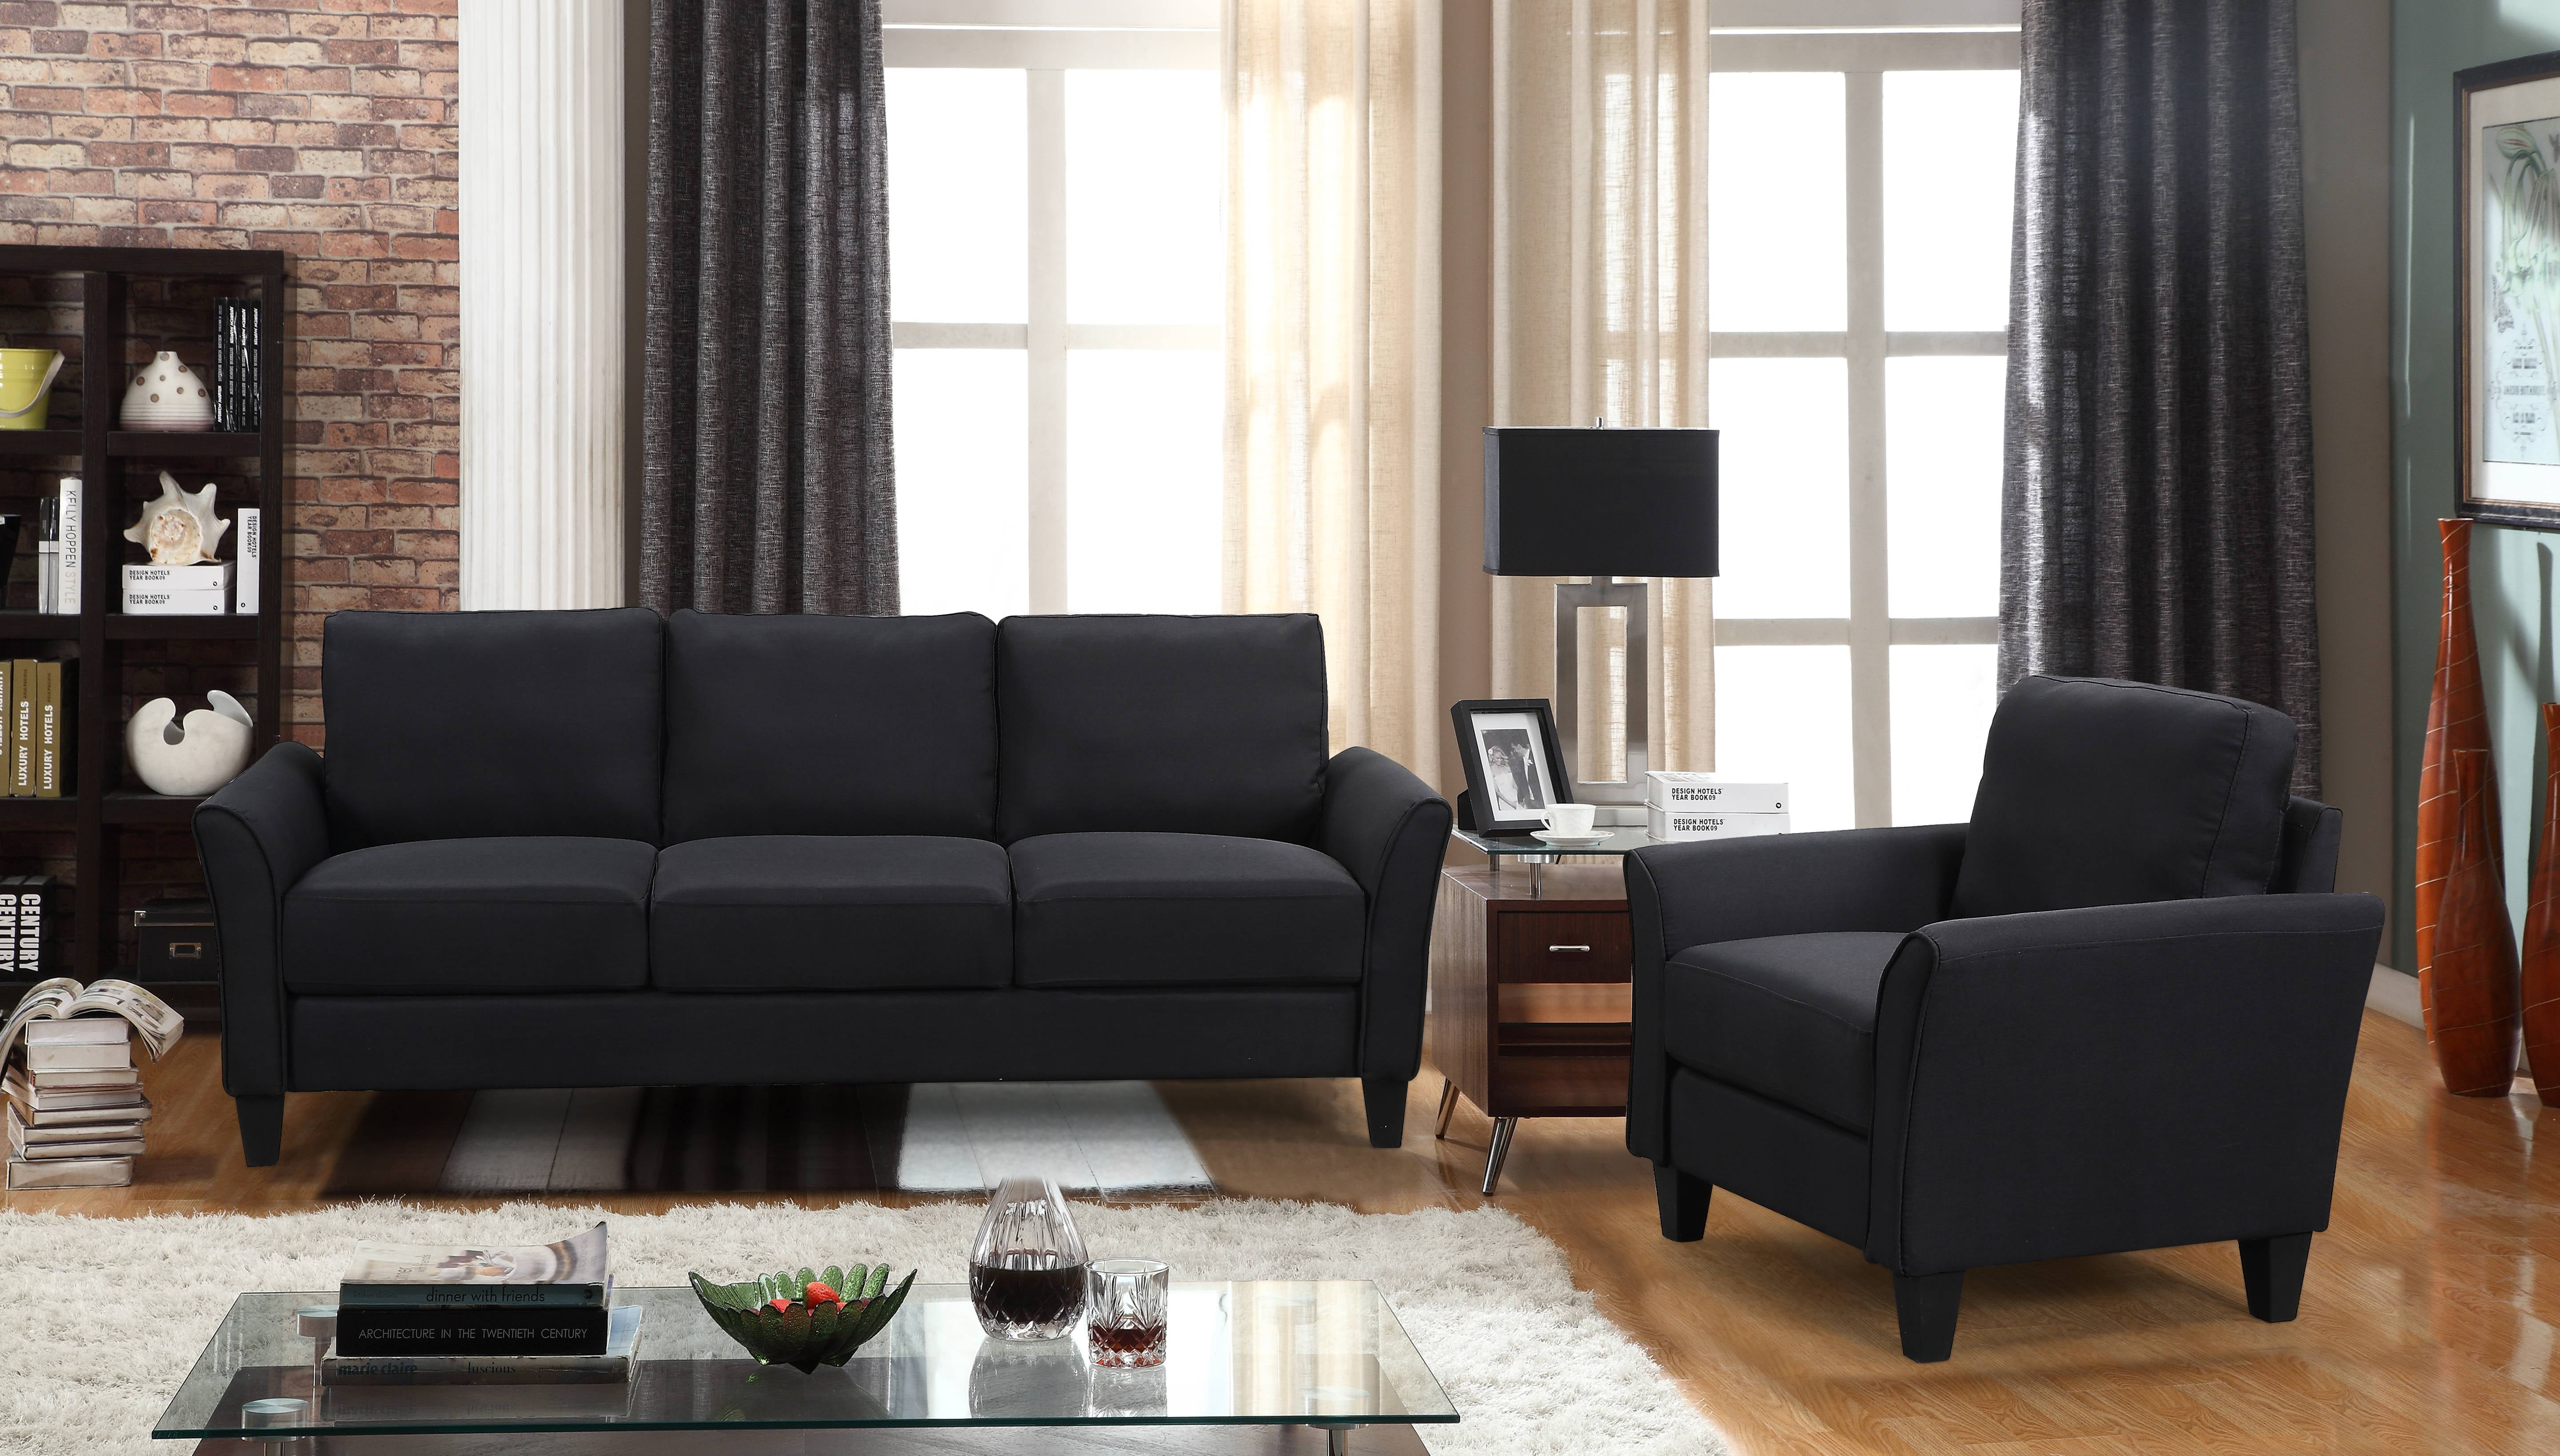 3 Piece Sectional Couch, Living Room Furniture Sofa with Removable